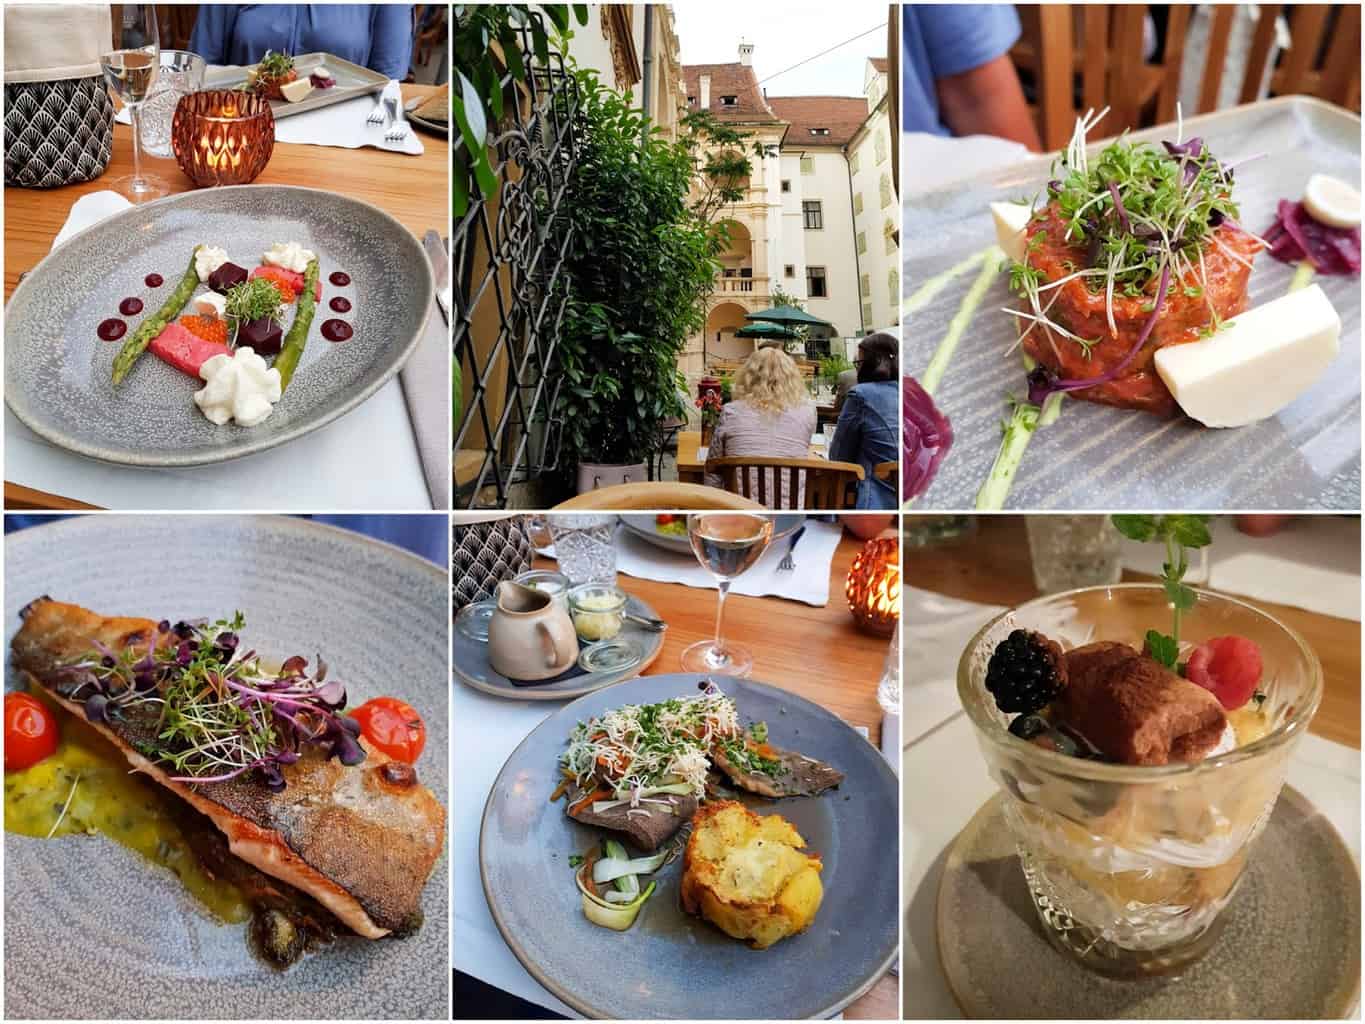 AUSTRIAN FOOD | 19 Delicious Things To Eat In Salzburg And Graz